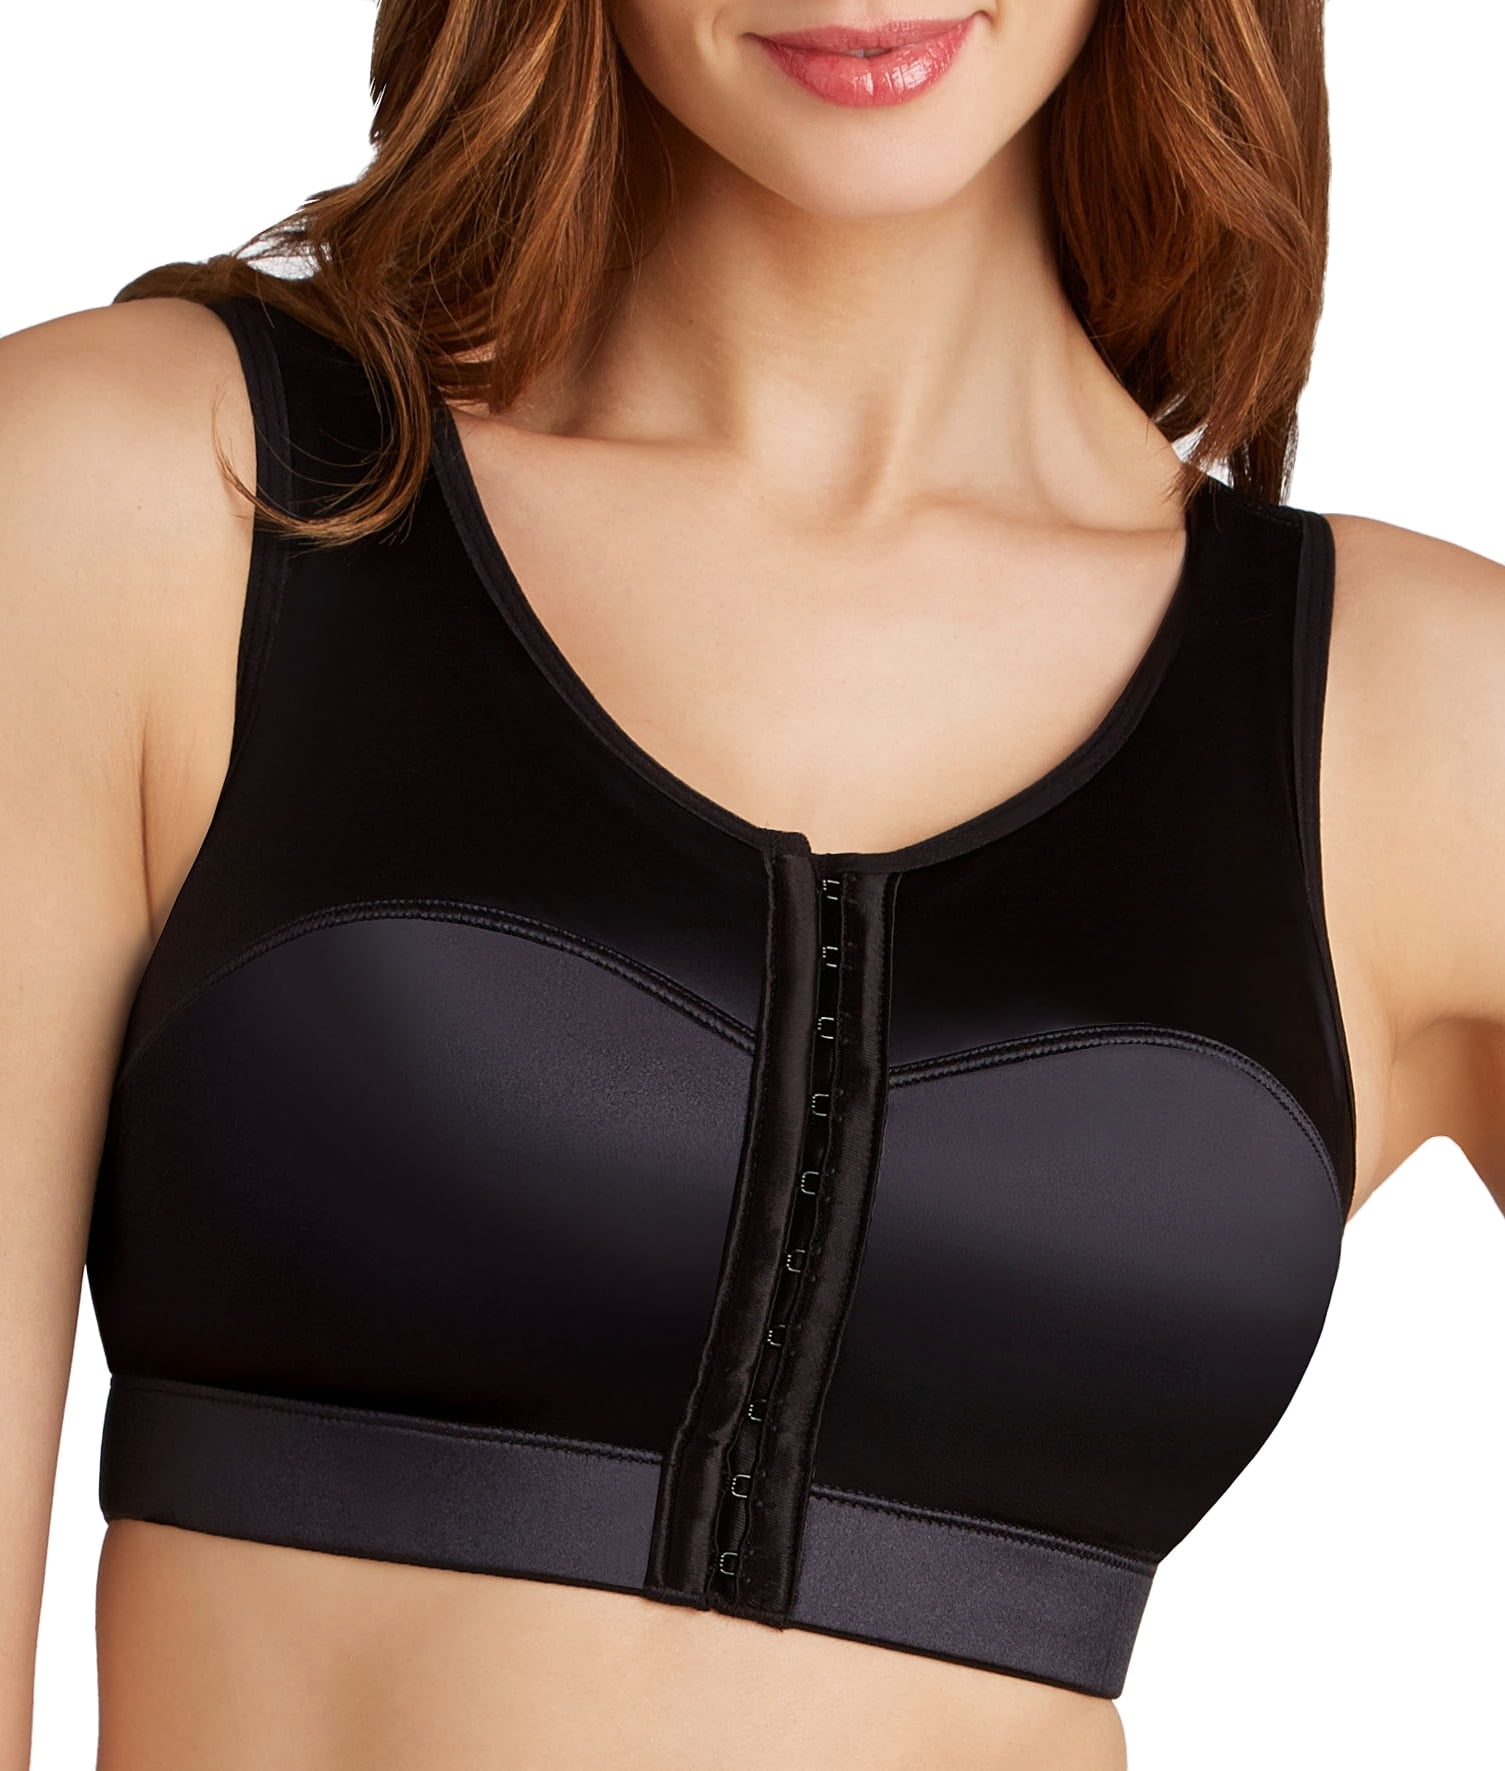 Enell Womens Full Figure High Impact Wire-Free Sports Bra Style-100-5-8